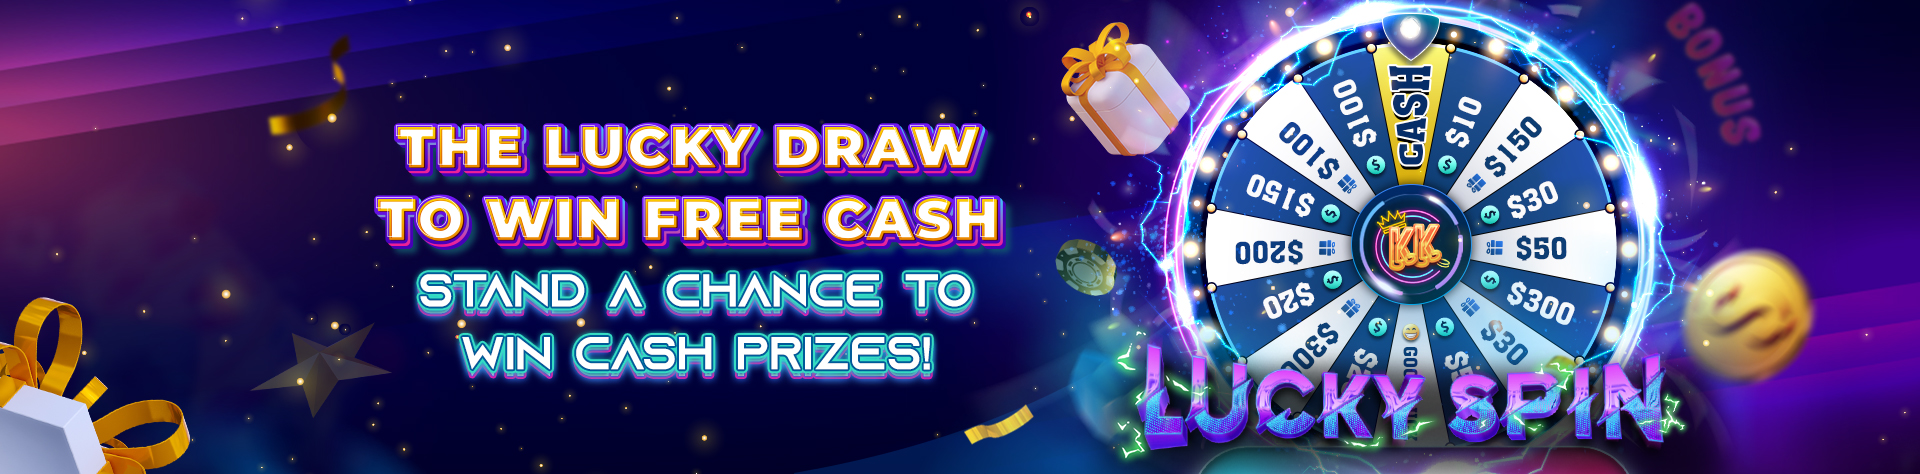 Weekly-Lucky-Spin-The-Lucky-Draw-To-Win-FREE-Cash.jpg